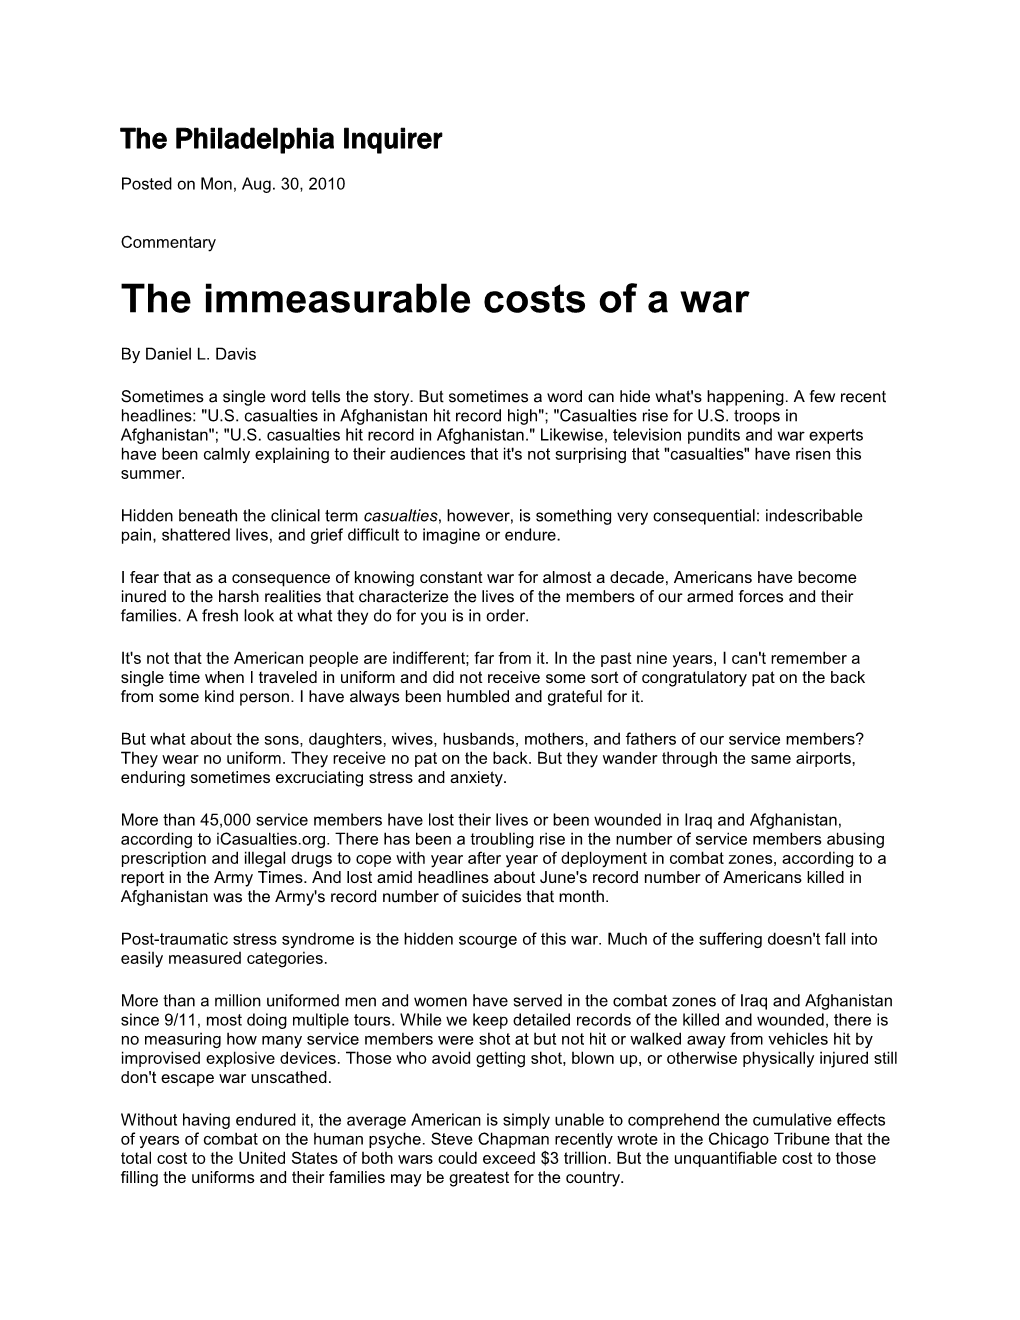 The Immeasurable Costs of a War